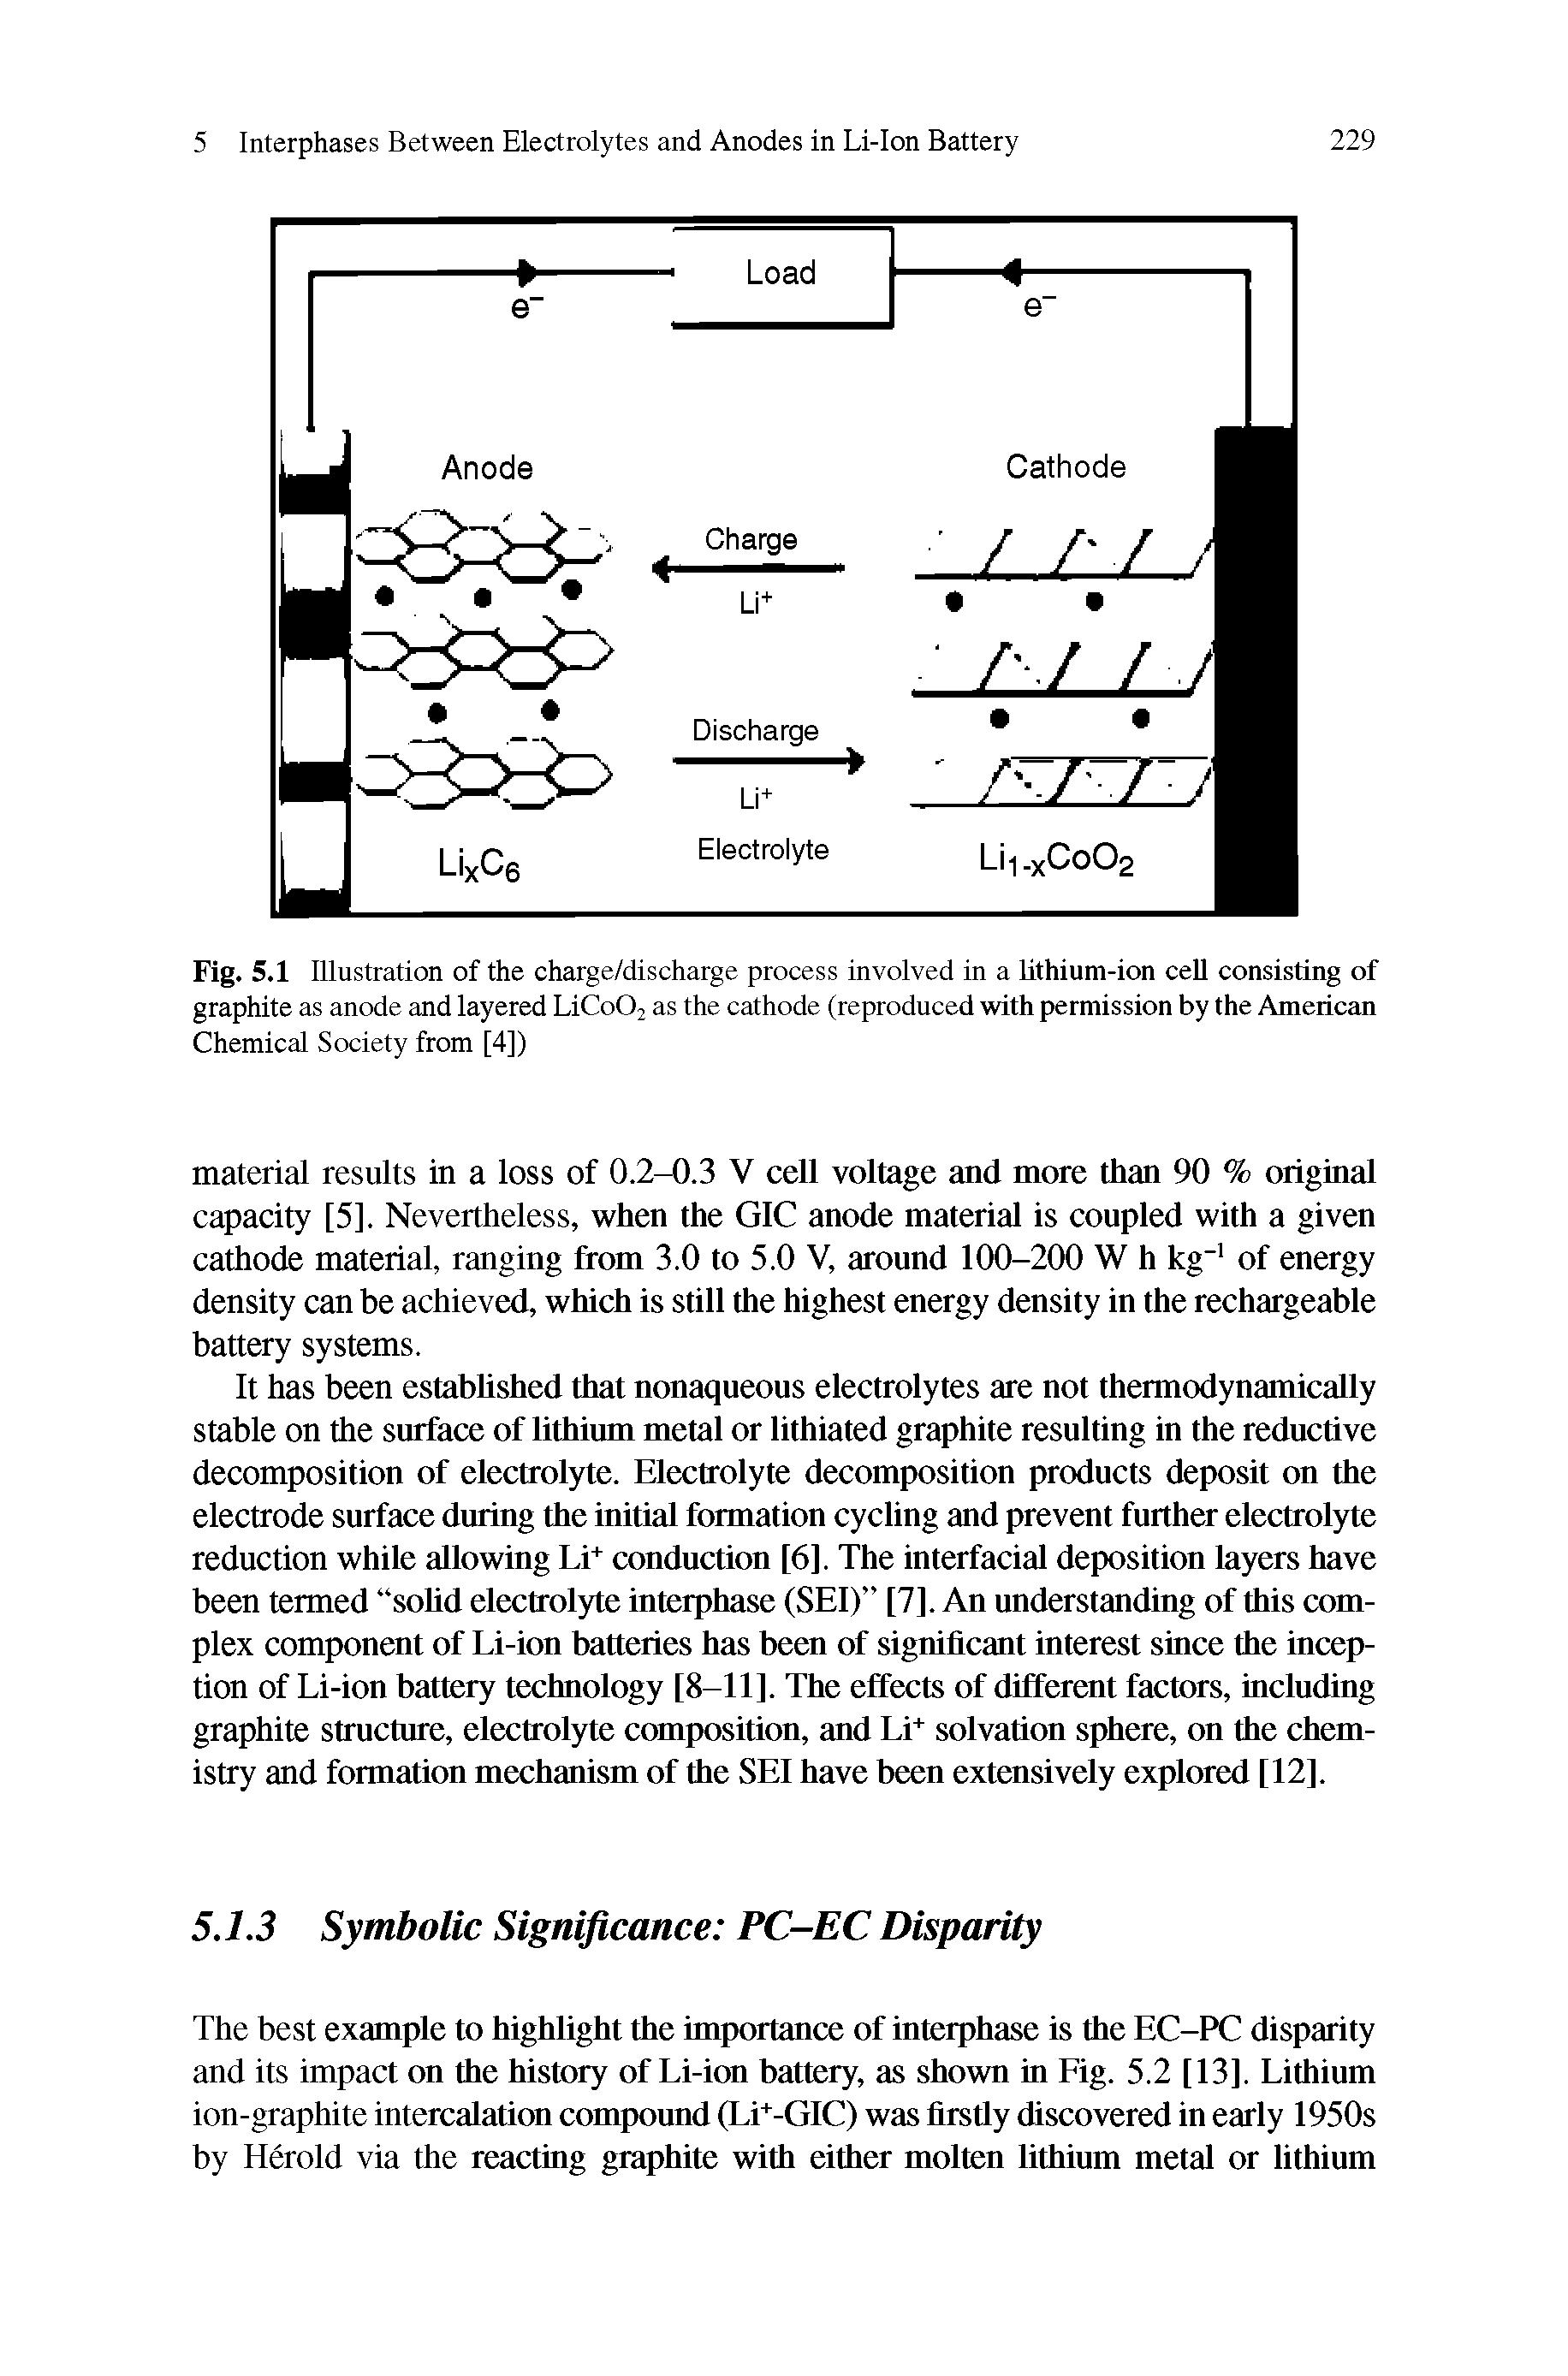 Fig. 5.1 Illustration of the charge/discharge process involved in a lithium-ion cell consisting of graphite as anode and layered LiCo02 as the cathode (reproduced with permission by the American Chemical Society from [4])...